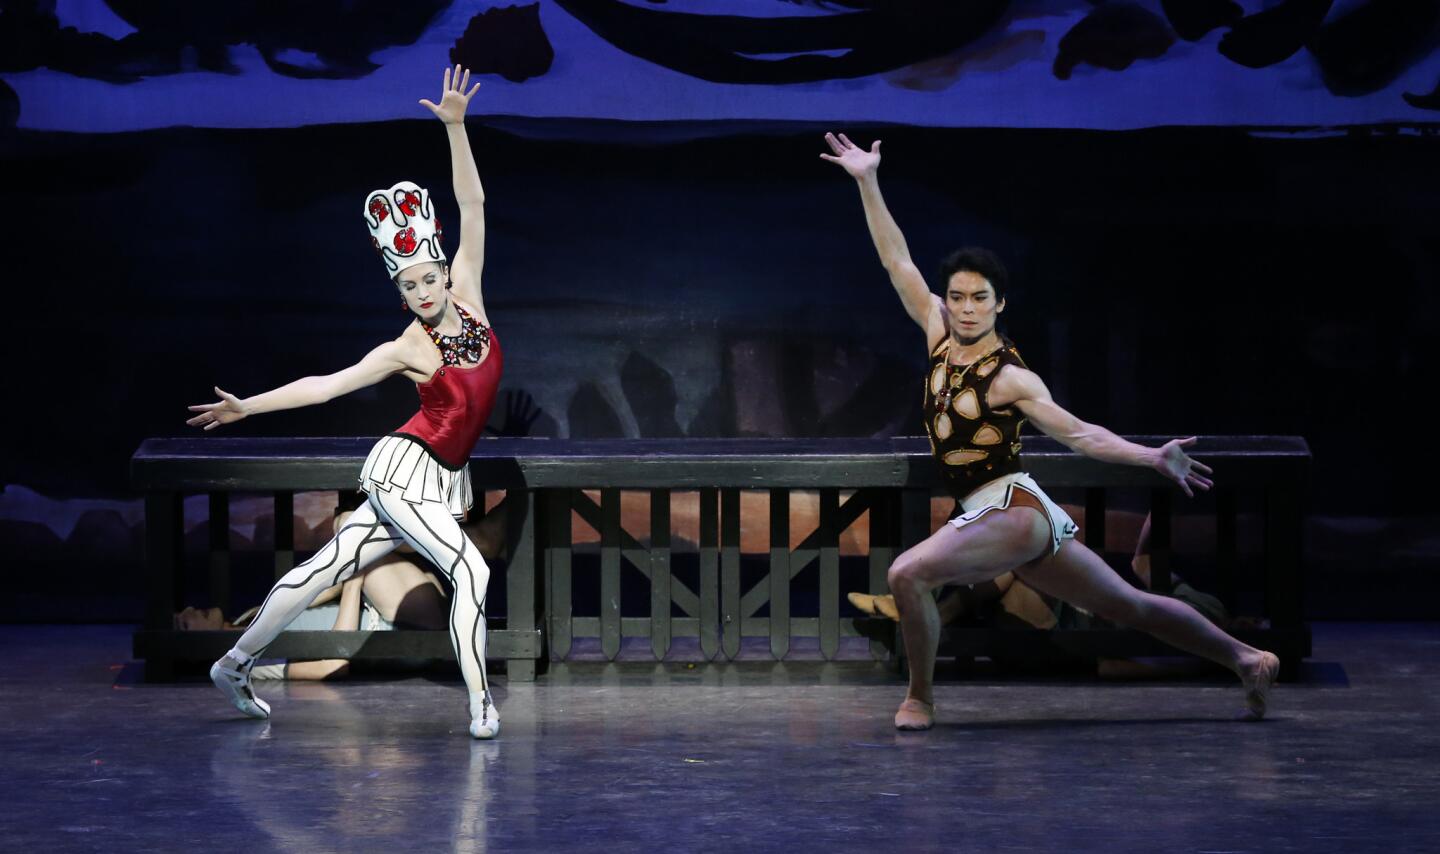 Los Angeles Ballet pays tribute to George Balanchine